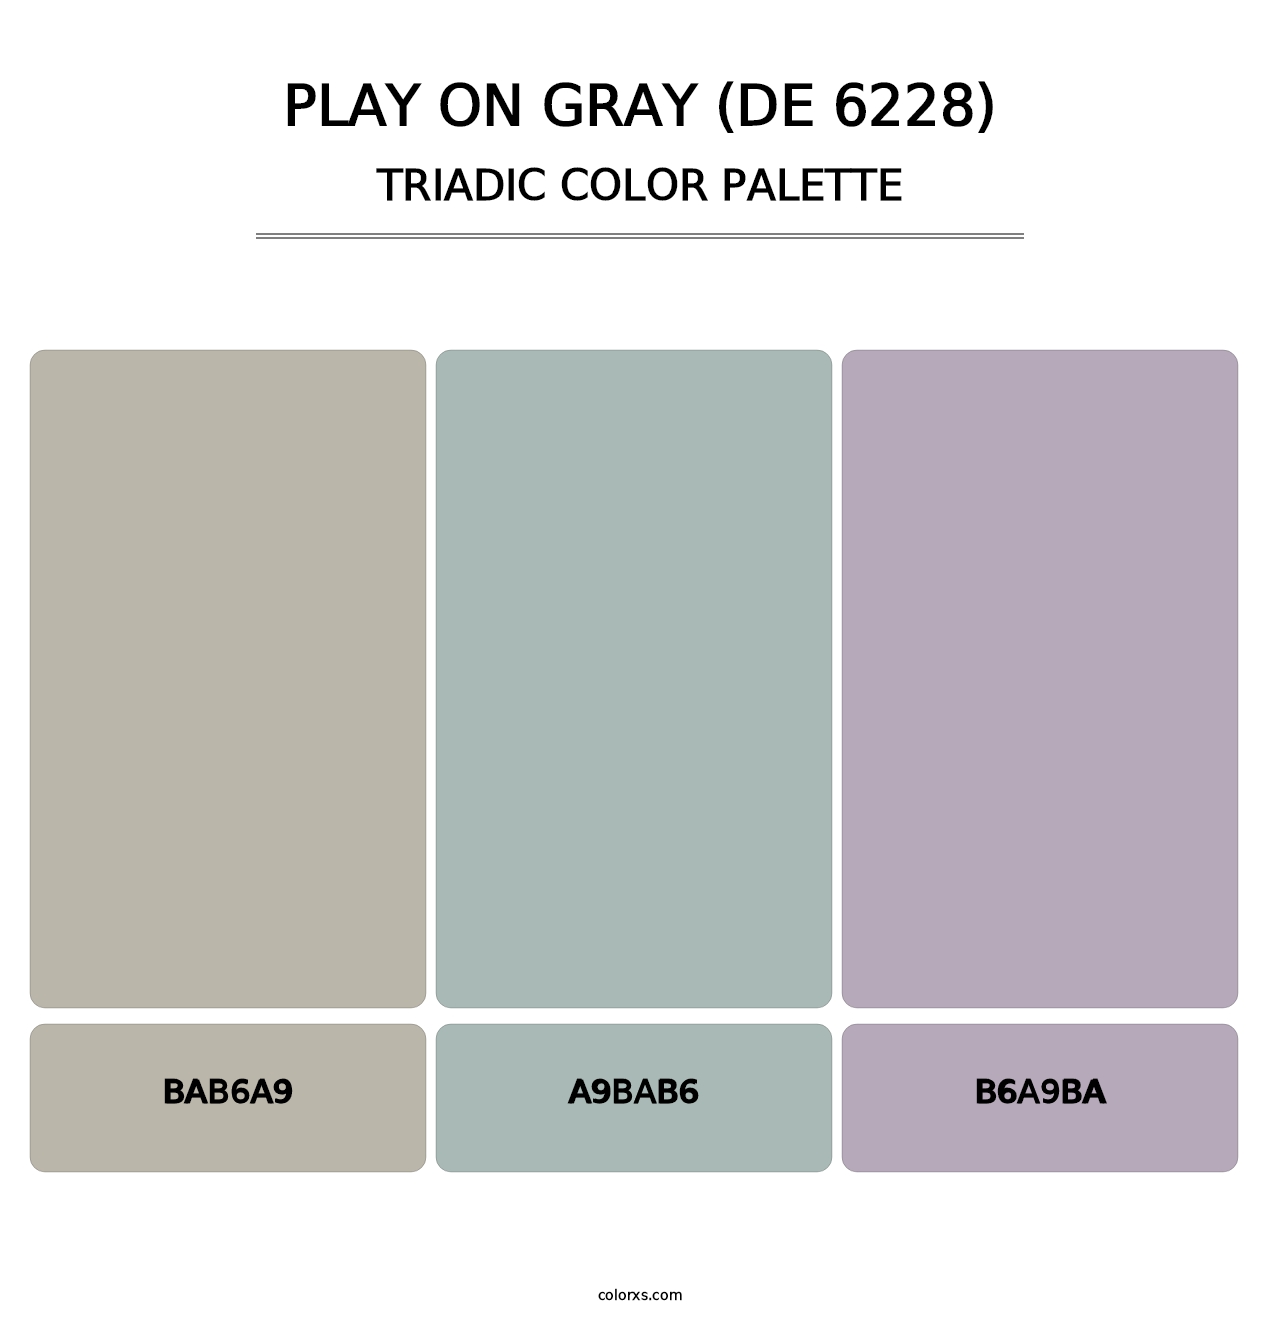 Play on Gray (DE 6228) - Triadic Color Palette